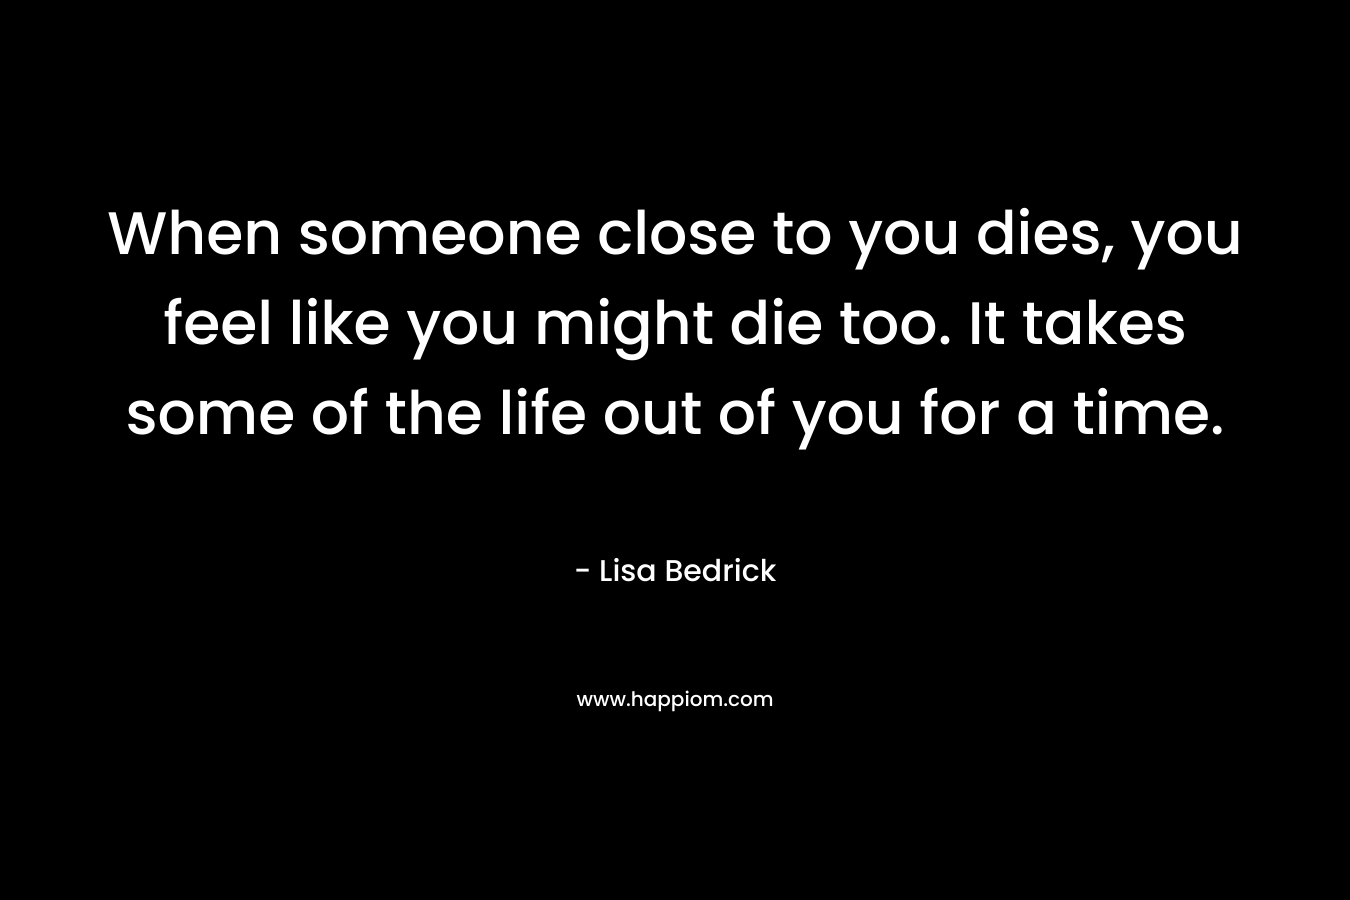 When someone close to you dies, you feel like you might die too. It takes some of the life out of you for a time.